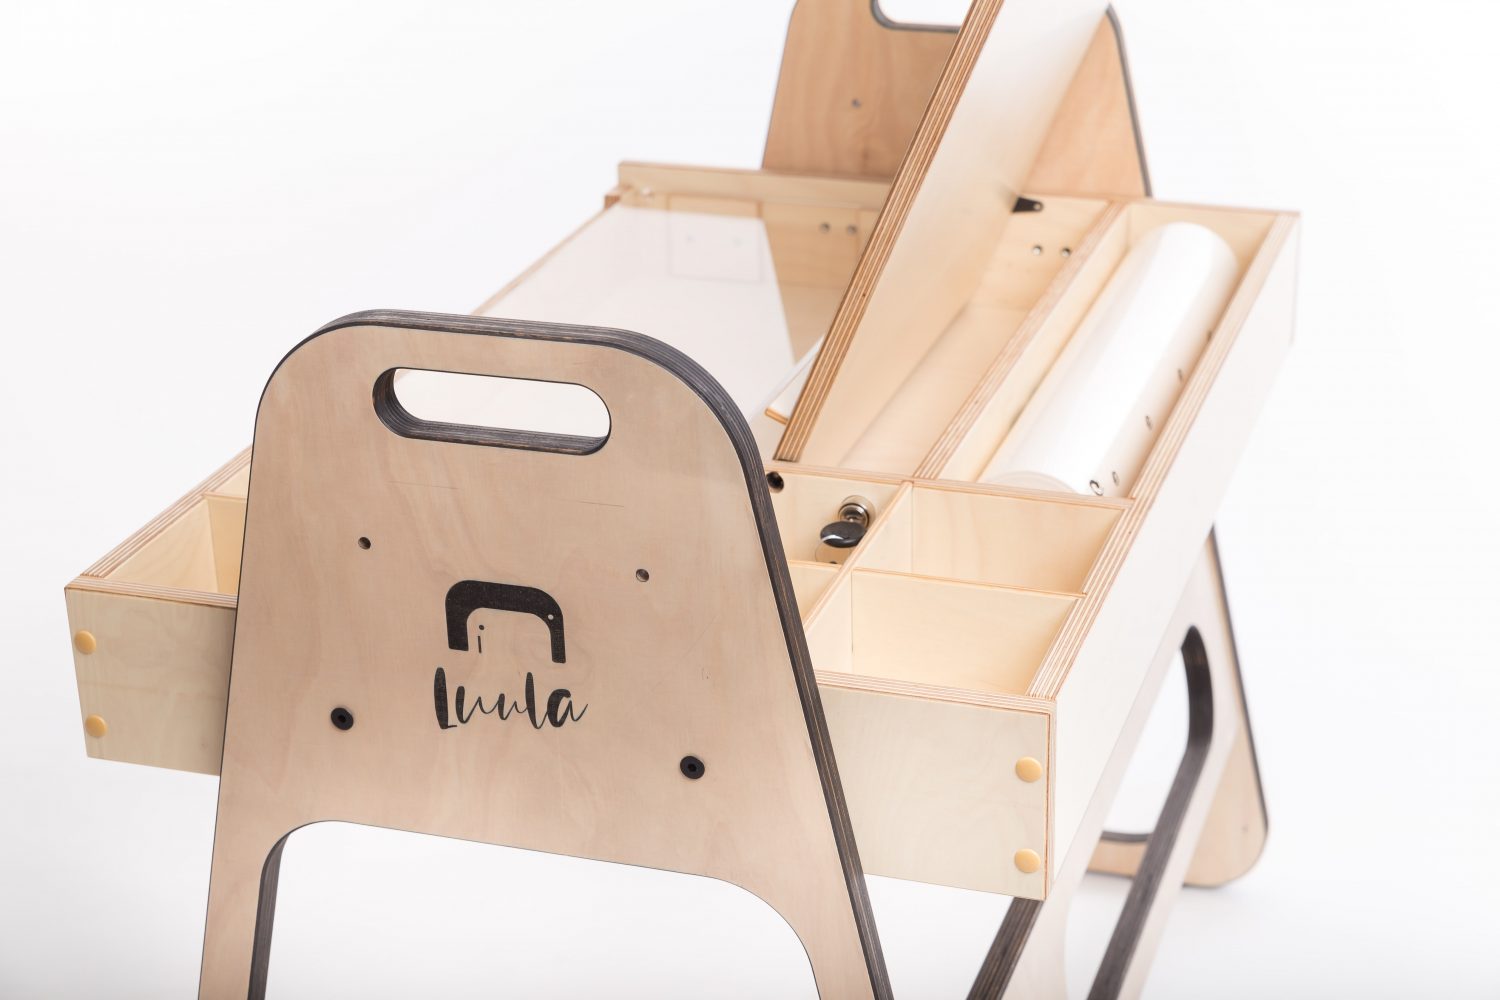 Childrens Montessori Table and Chair by Luula